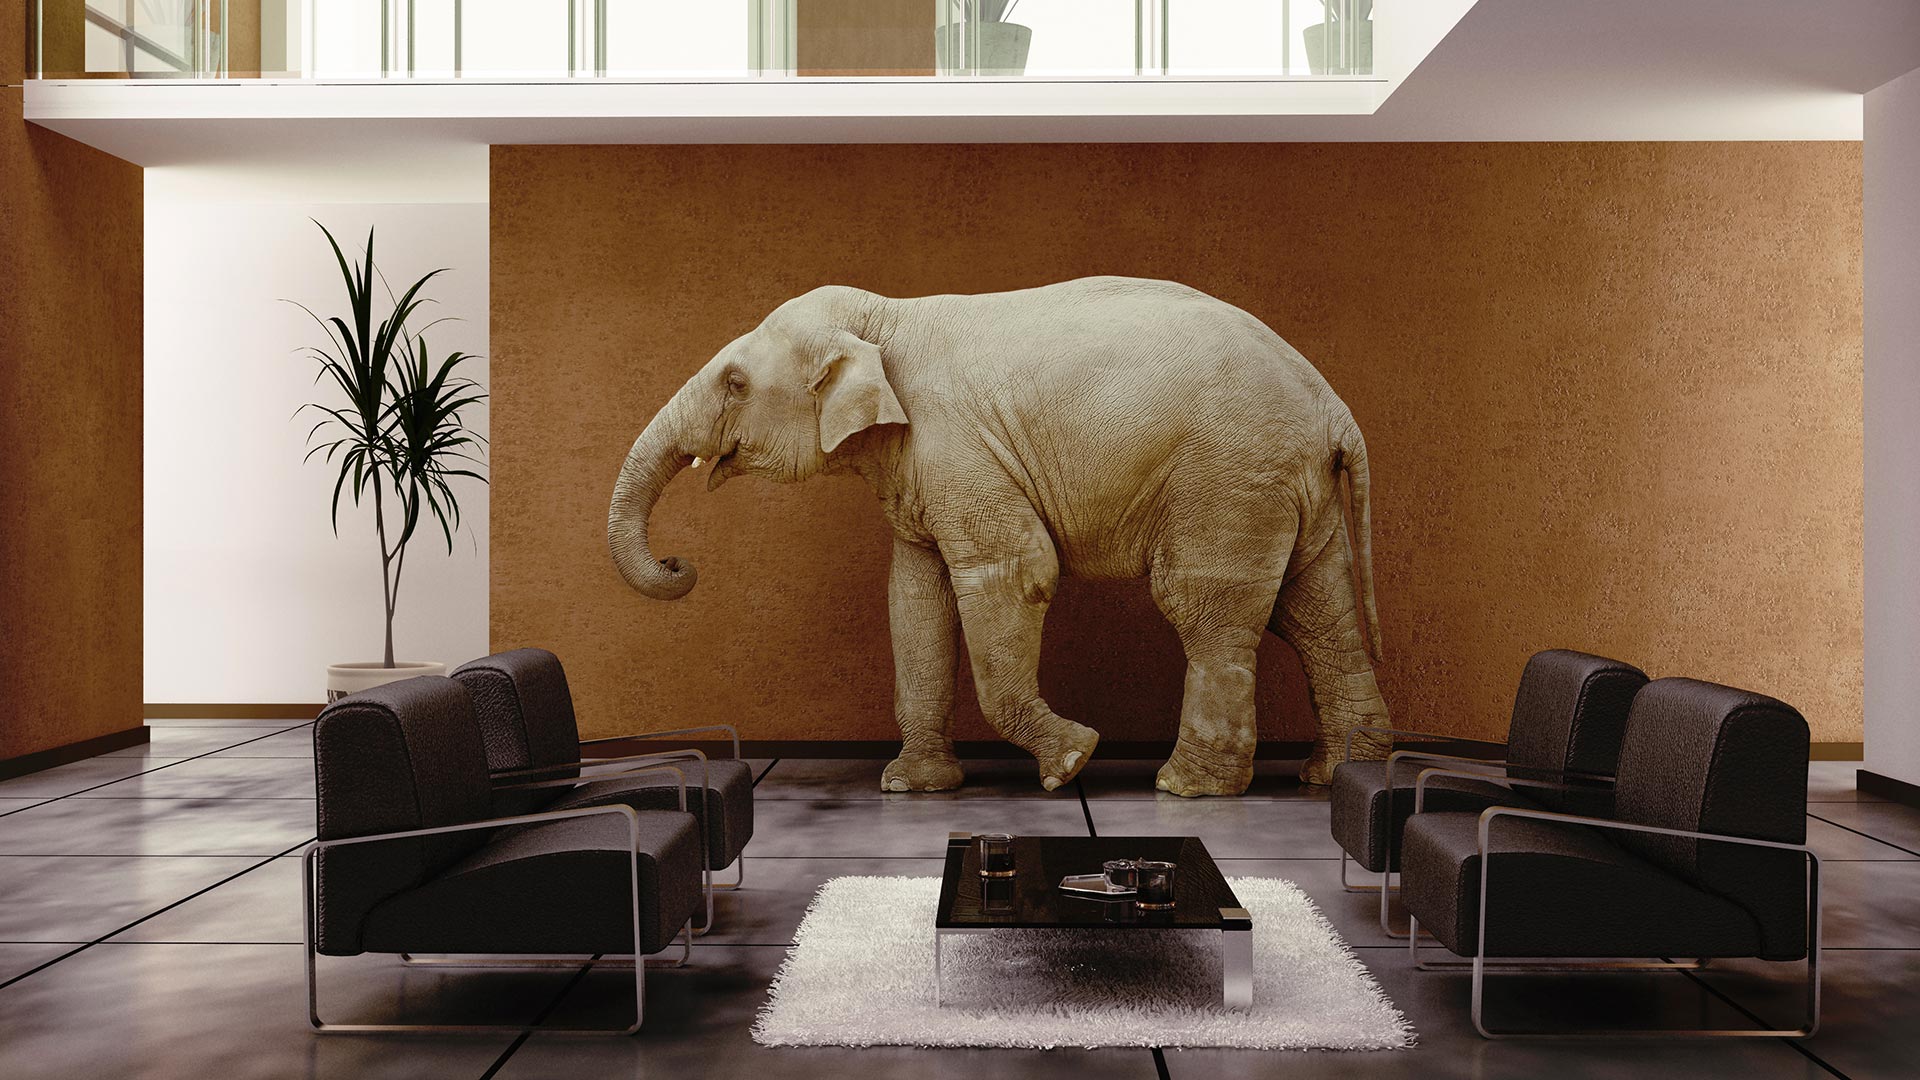 Tackle-Today-The-Elephant-in-the-Room